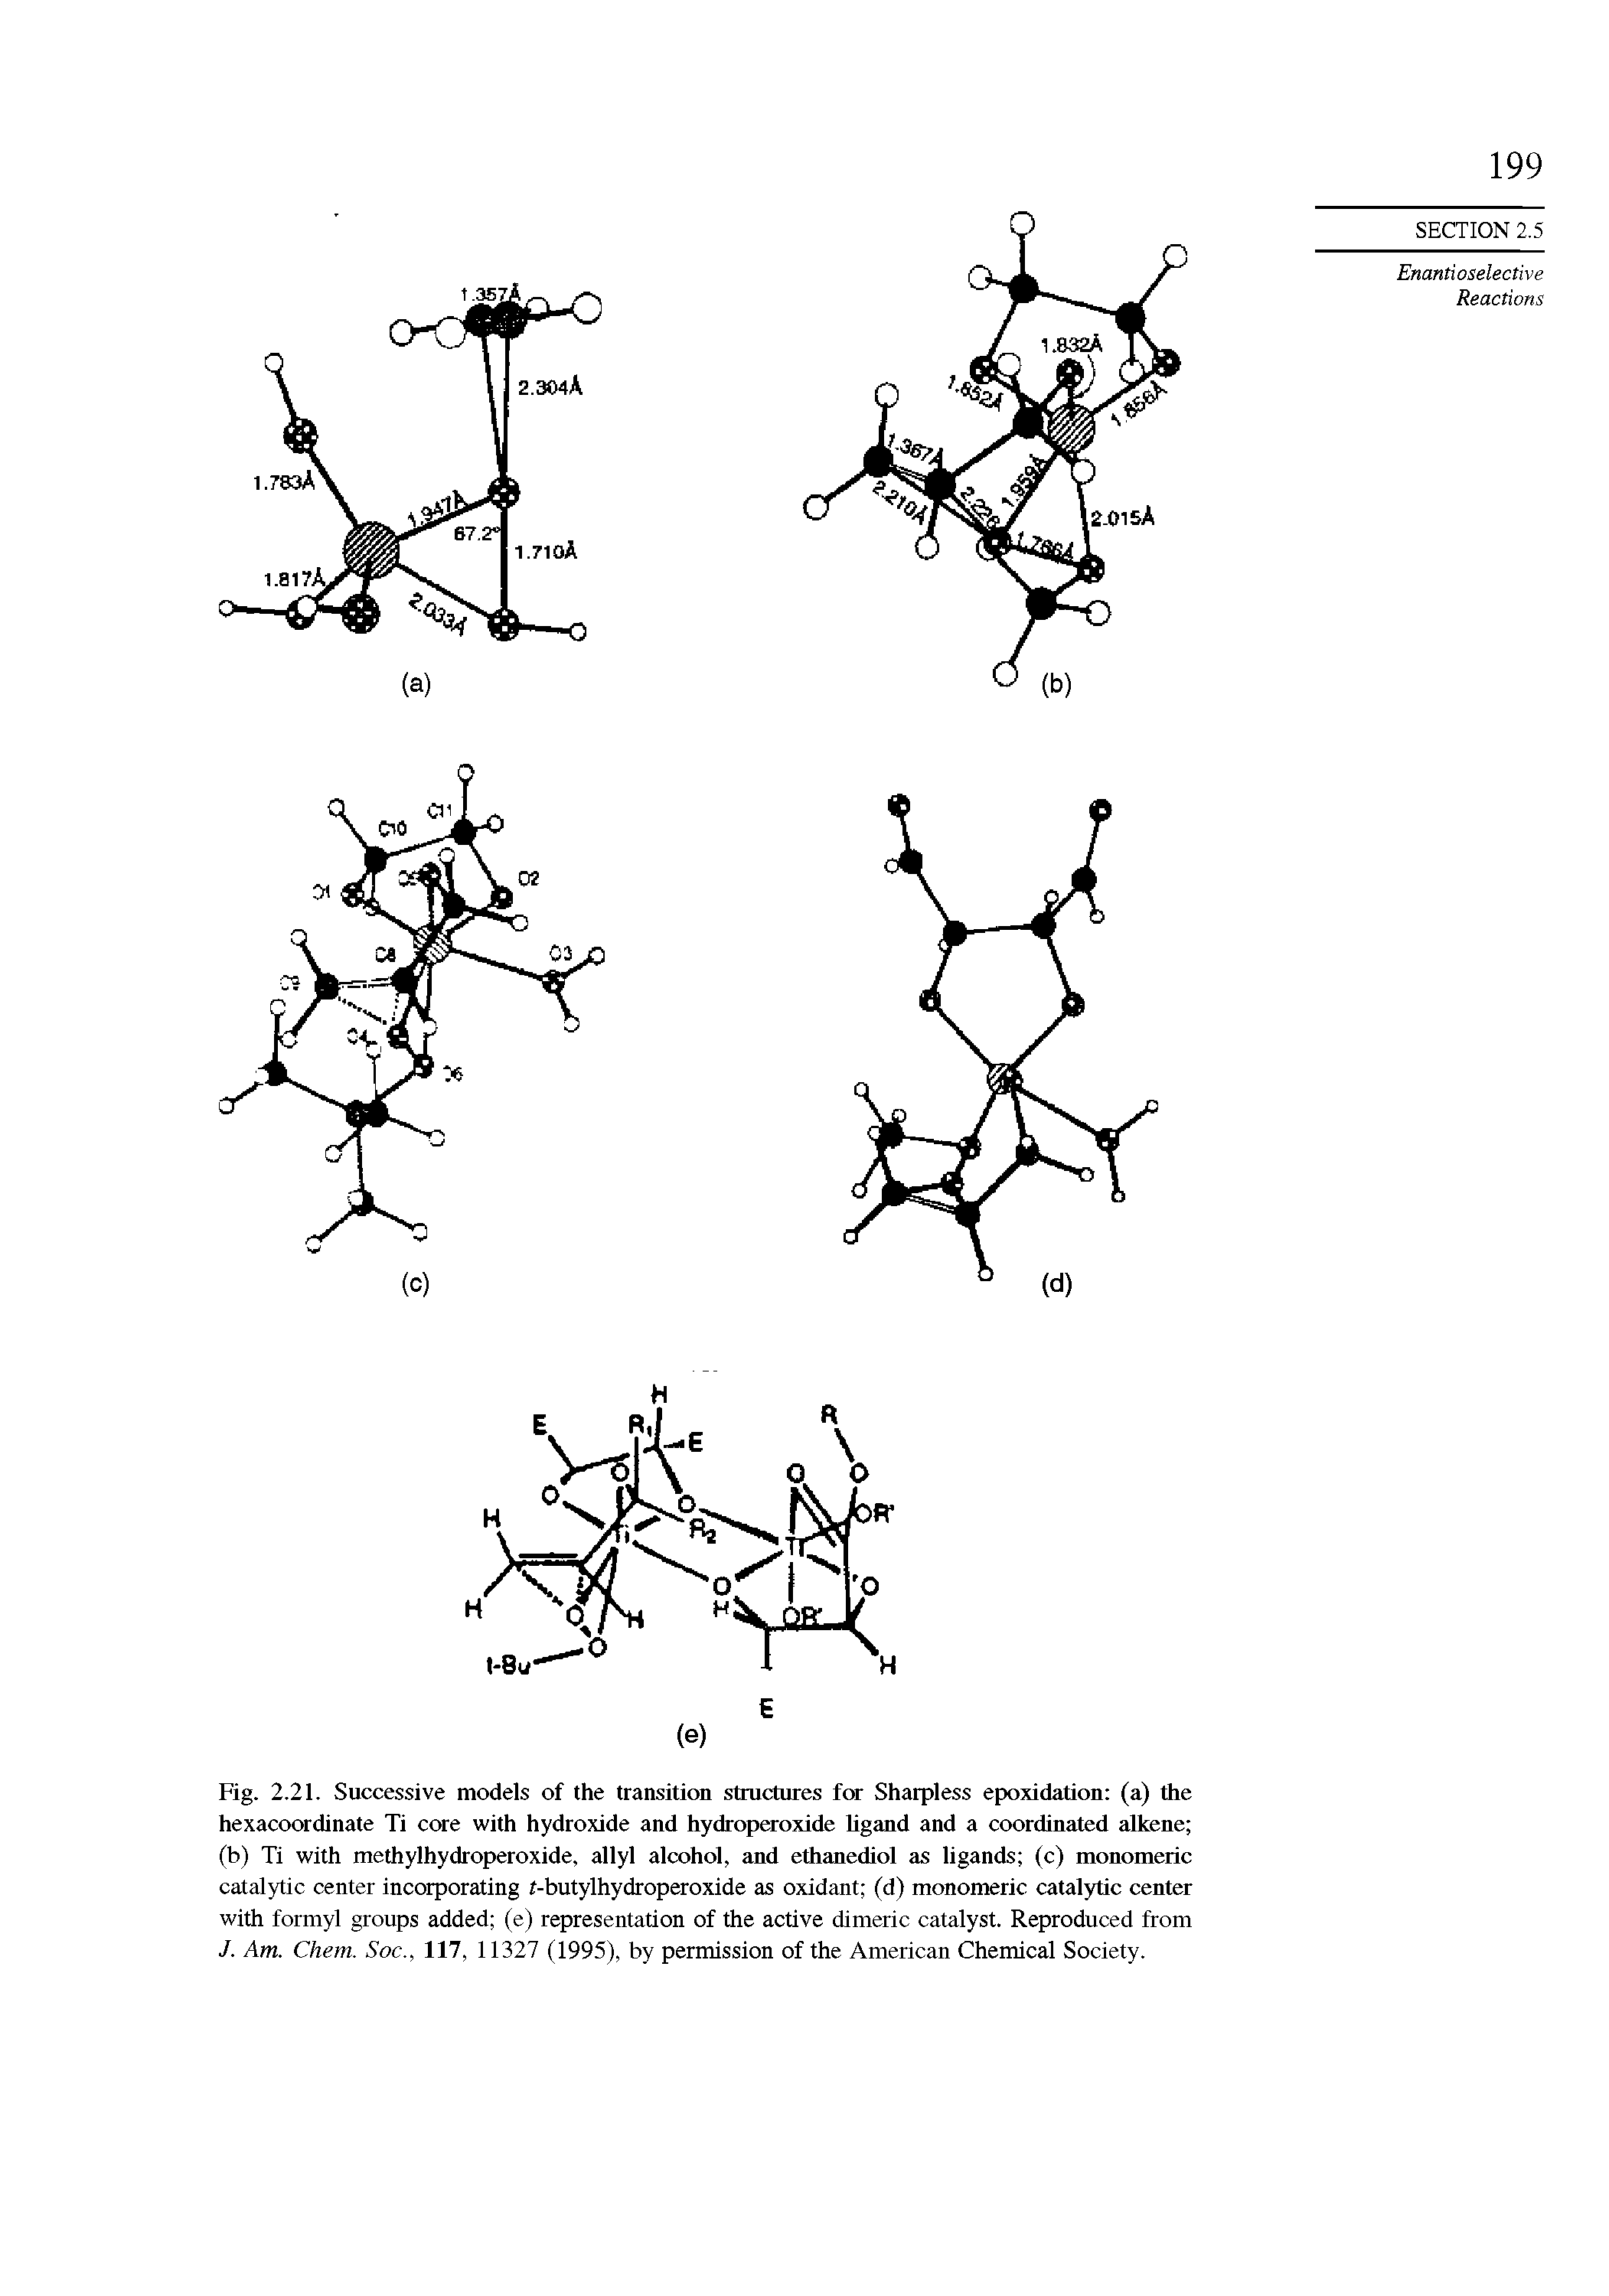 Fig. 2.21. Successive models of the transition structures for Sharpless epoxidation (a) the hexacoordinate Ti core with hydroxide and hydroperoxide ligand and a coordinated alkene (b) Ti with methylhydroperoxide, allyl alcohol, and ethanediol as ligands (c) monomeric catalytic center incorporating f-butylhydroperoxide as oxidant (d) monomeric catalytic center with formyl groups added (e) representation of the active dimeric catalyst. Reproduced from J. Am. Chem. Soc., 117, 11327 (1995), by permission of the American Chemical Society.